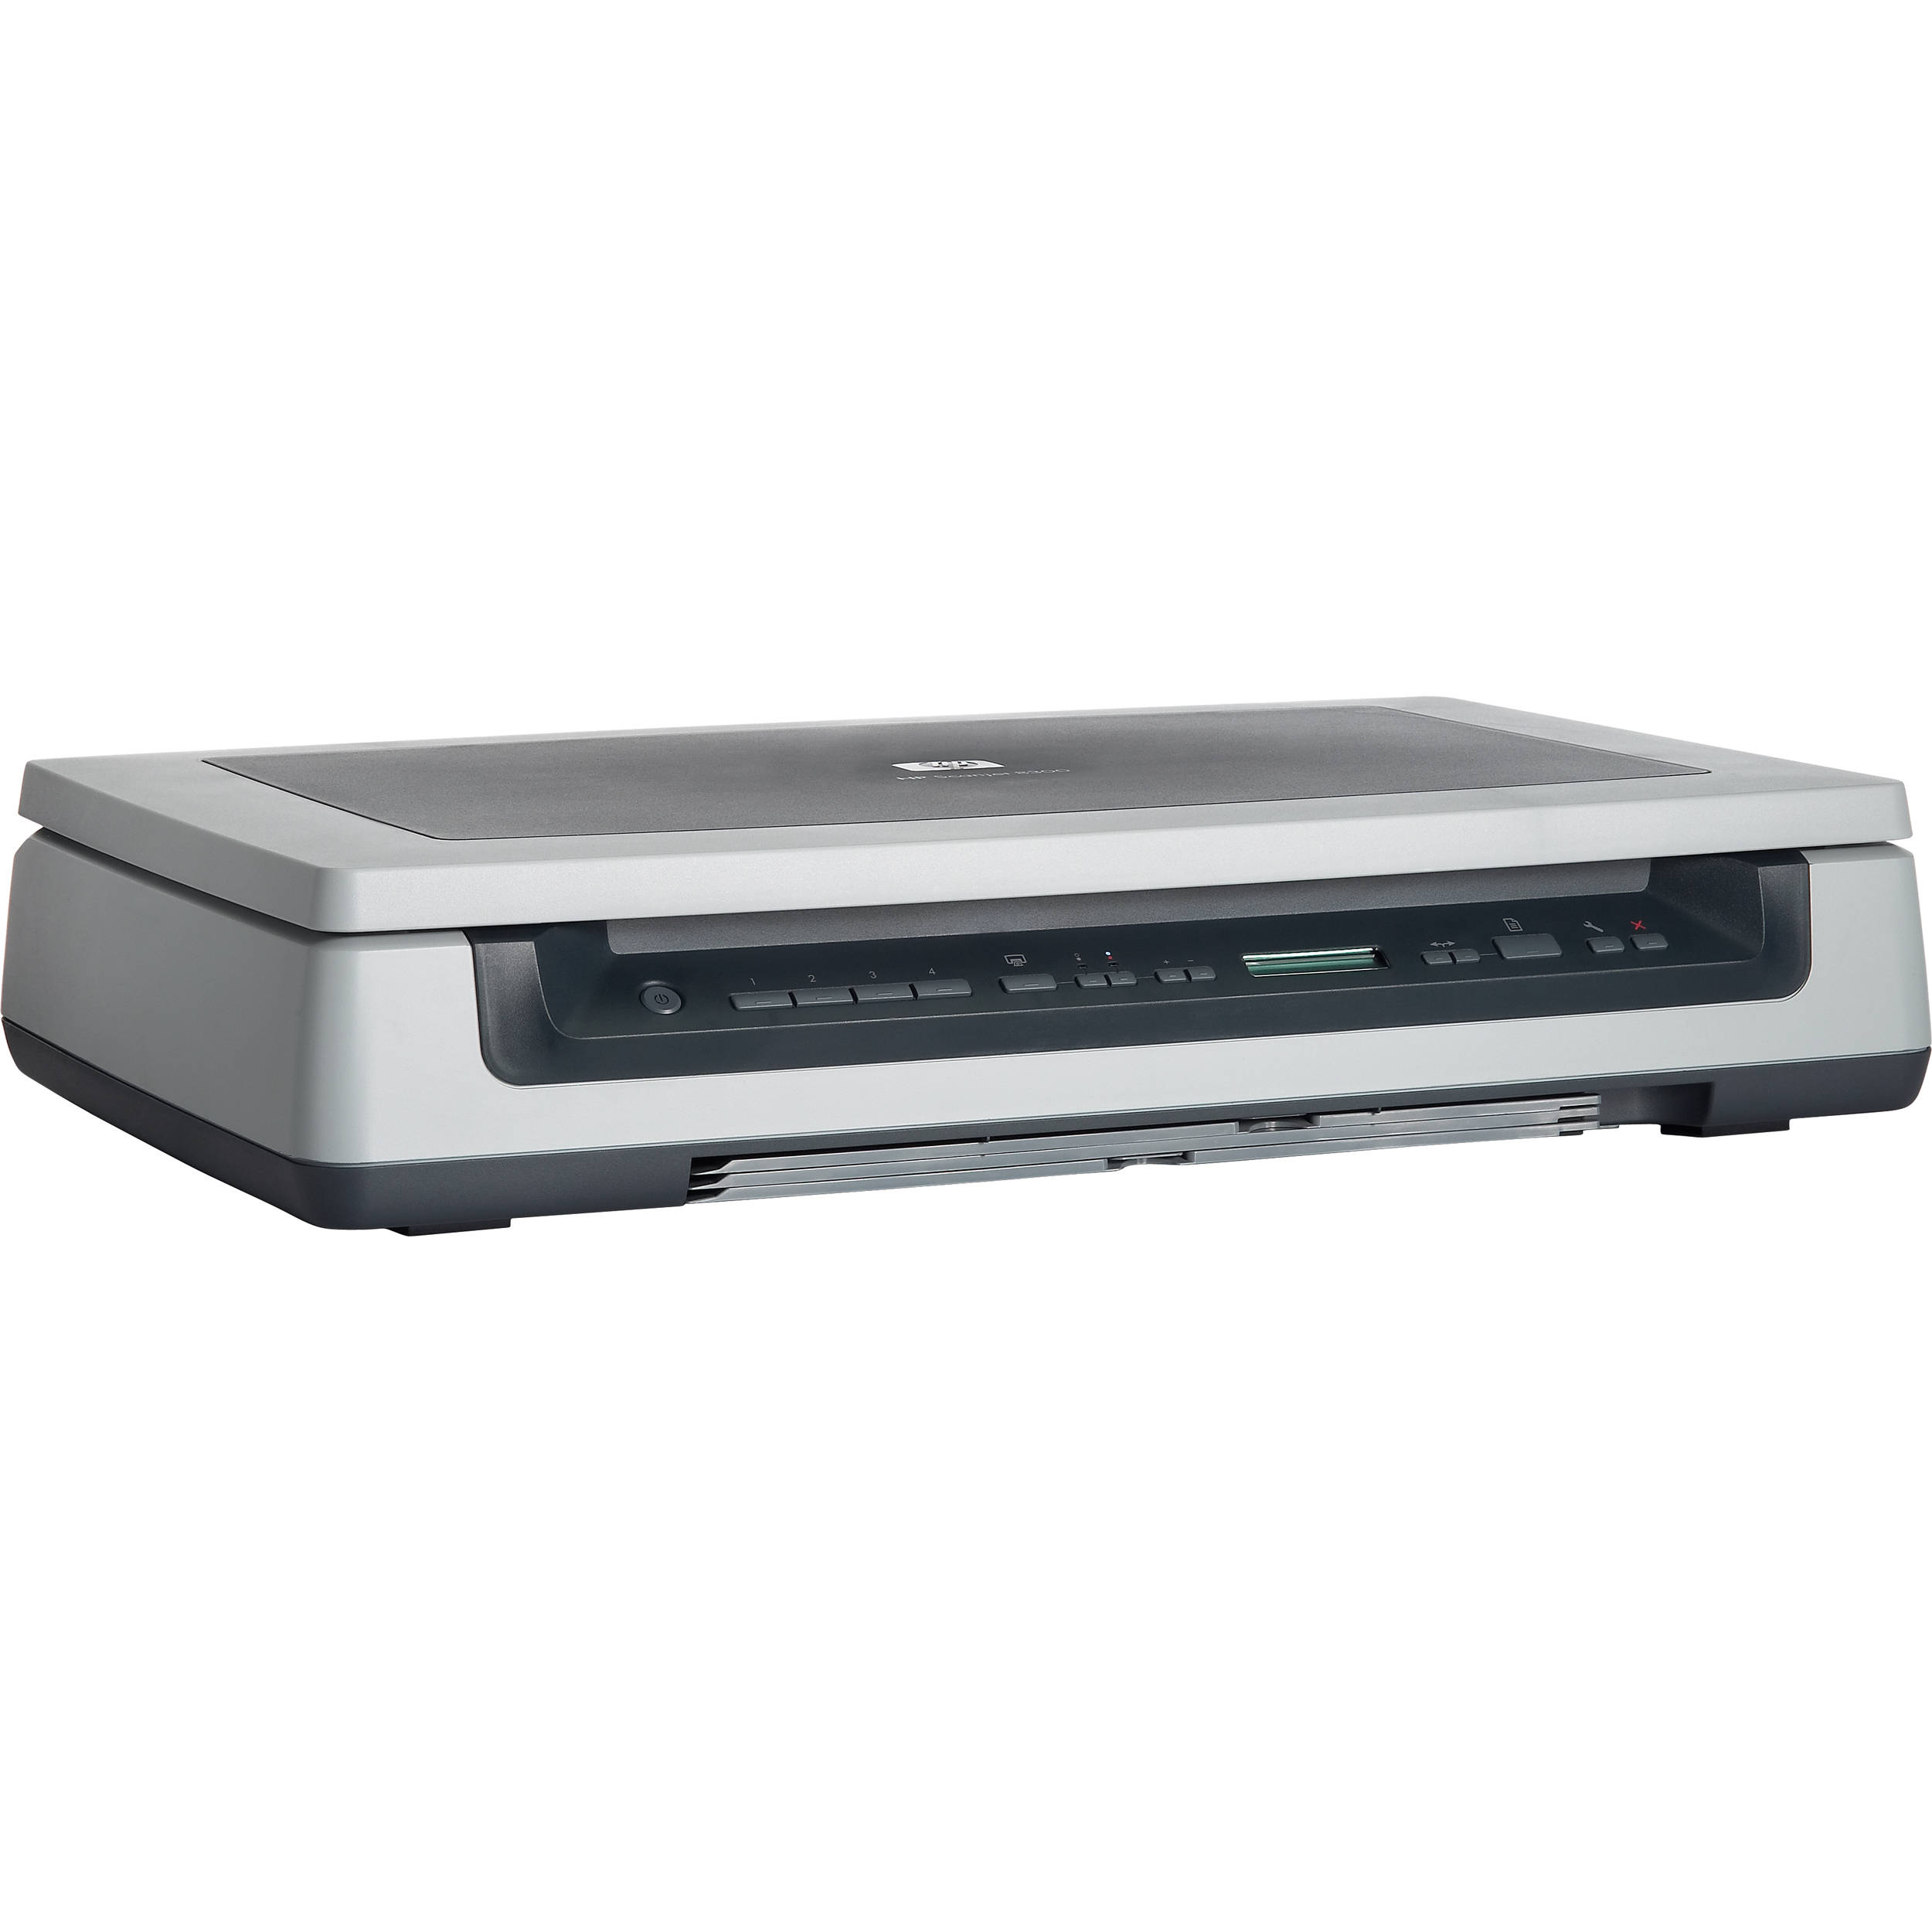 Hp 8300 scanner drivers